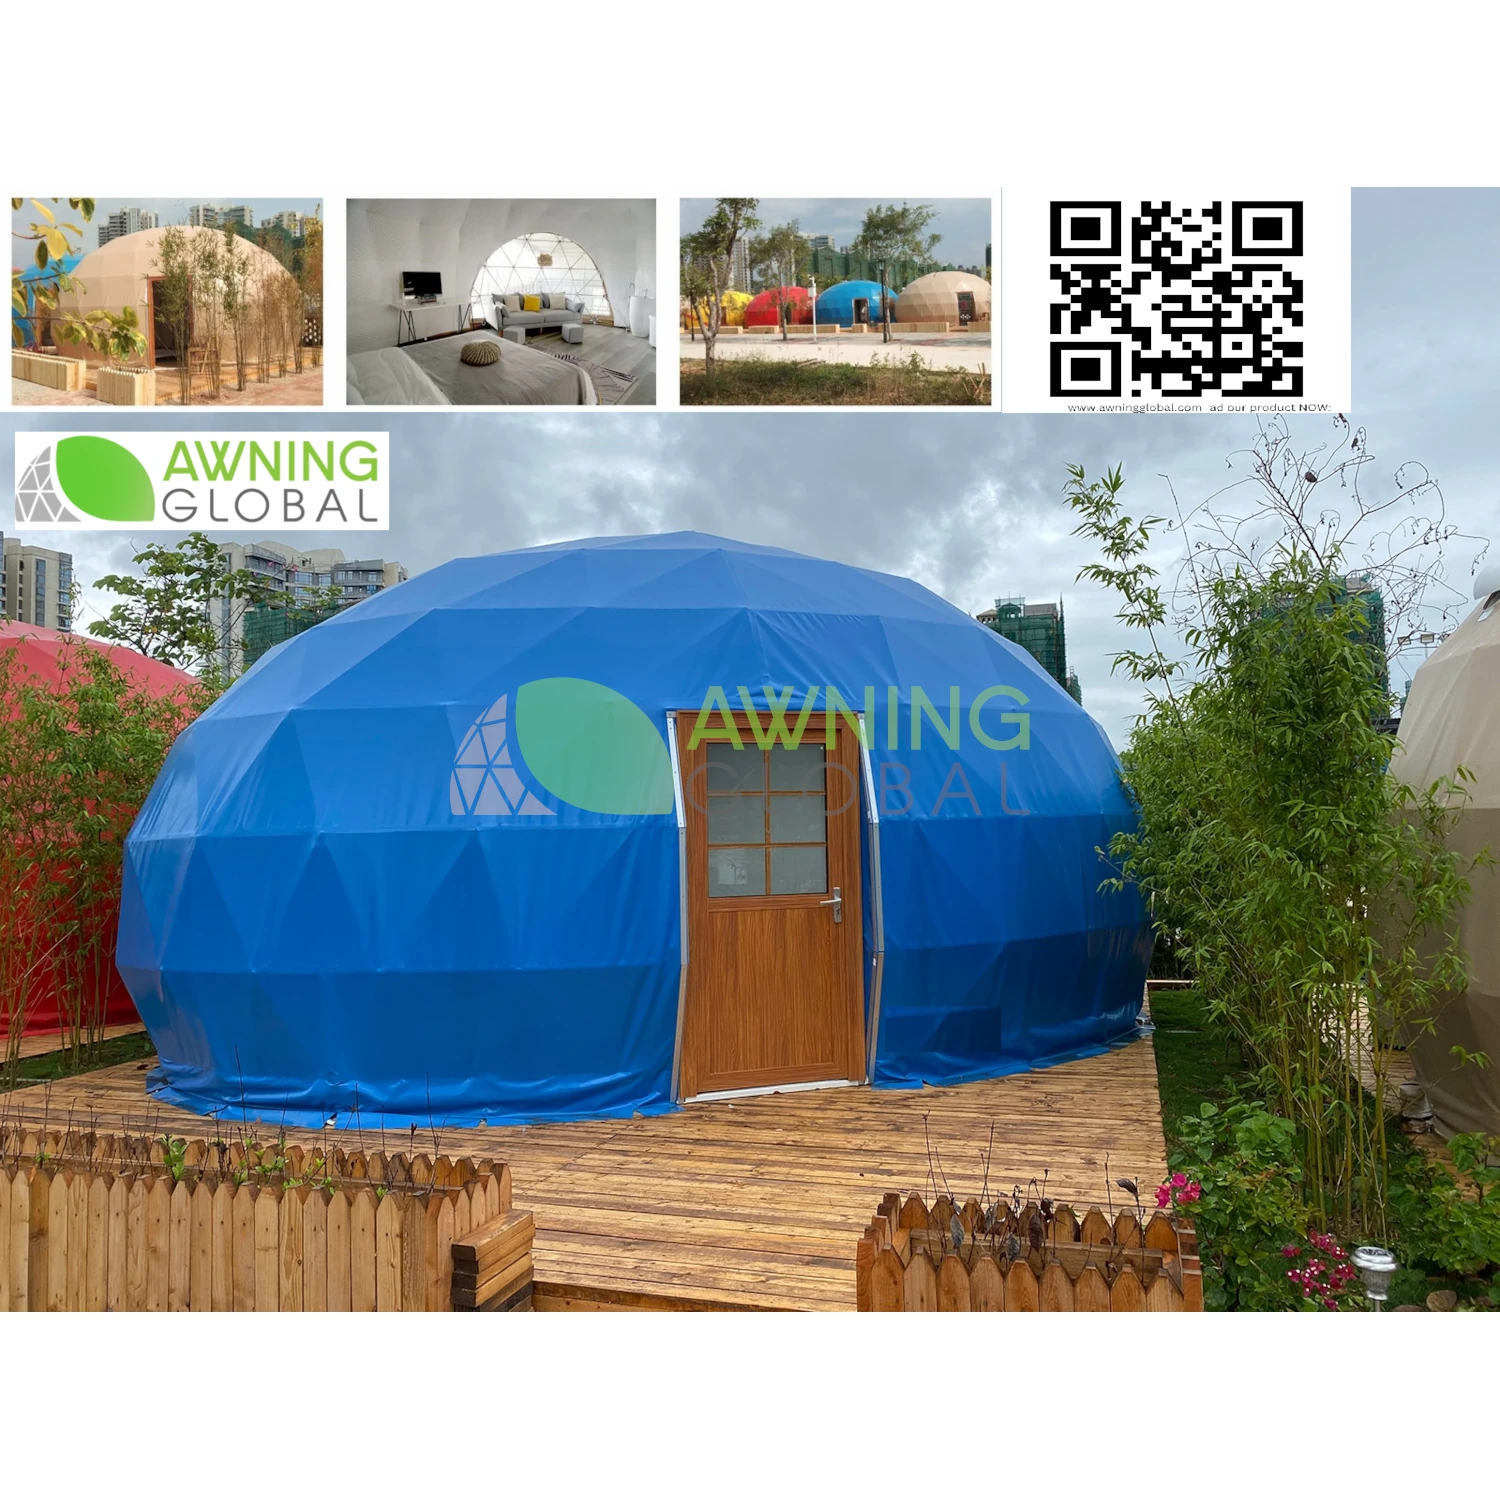 Glamping-dome-tent-oval-shape (1)